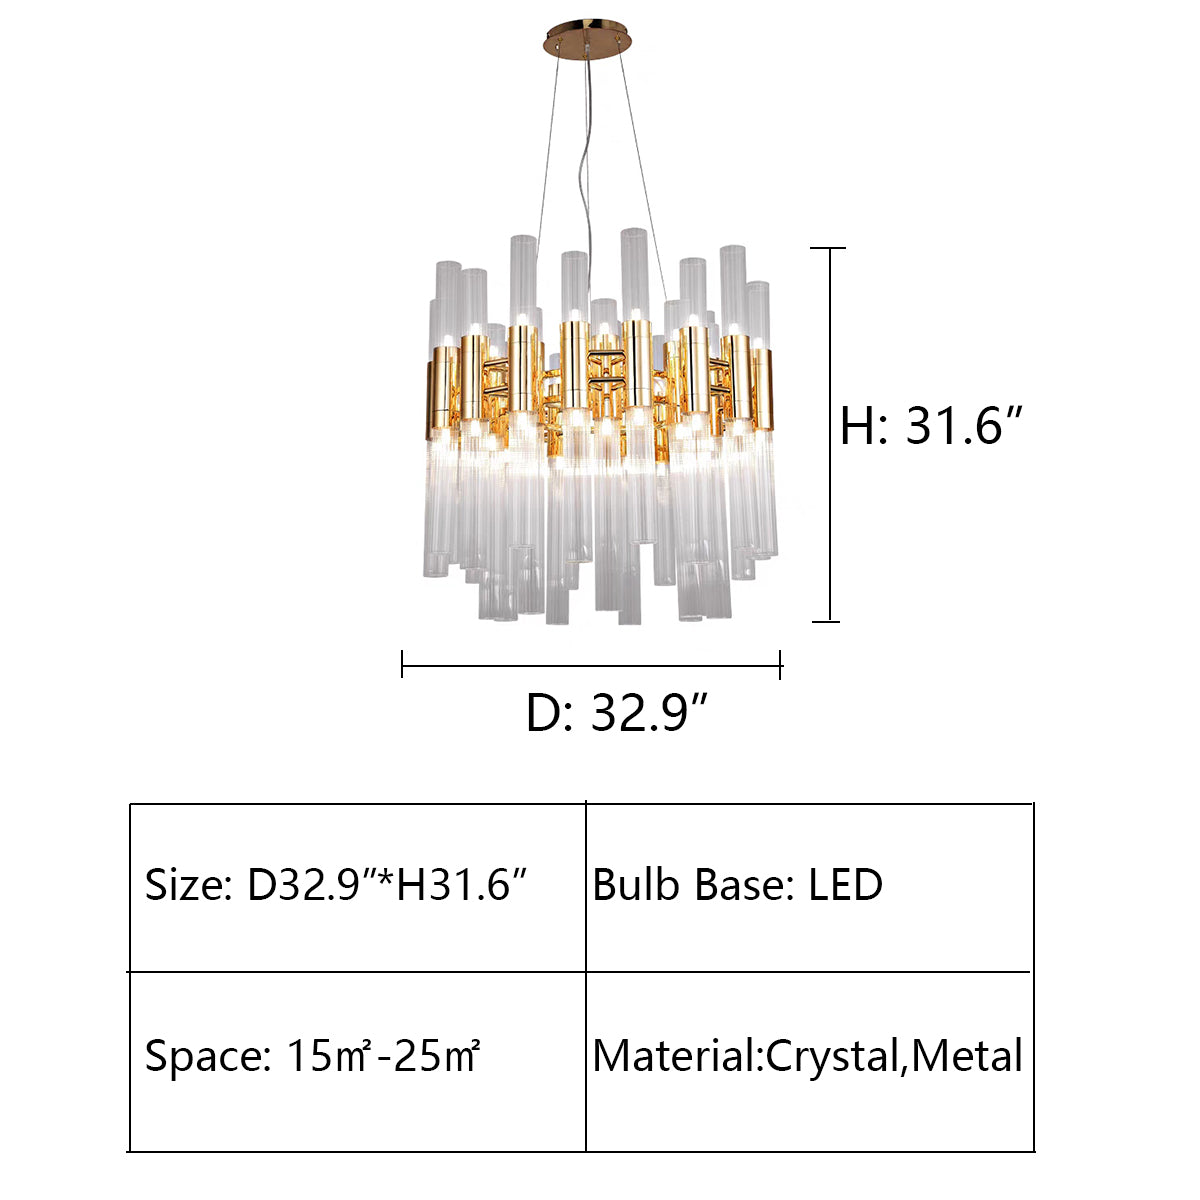 Round: D32.9"*H31.6" chandelier,chandeliers,pendant,crystal,metal,gold,clear,round,ring,circle,branch,light luxury,modern,nordic,ceiling,oval,rectangle,dining room,dining table,bar,kitchen island,living room,long table,big table,bedroom